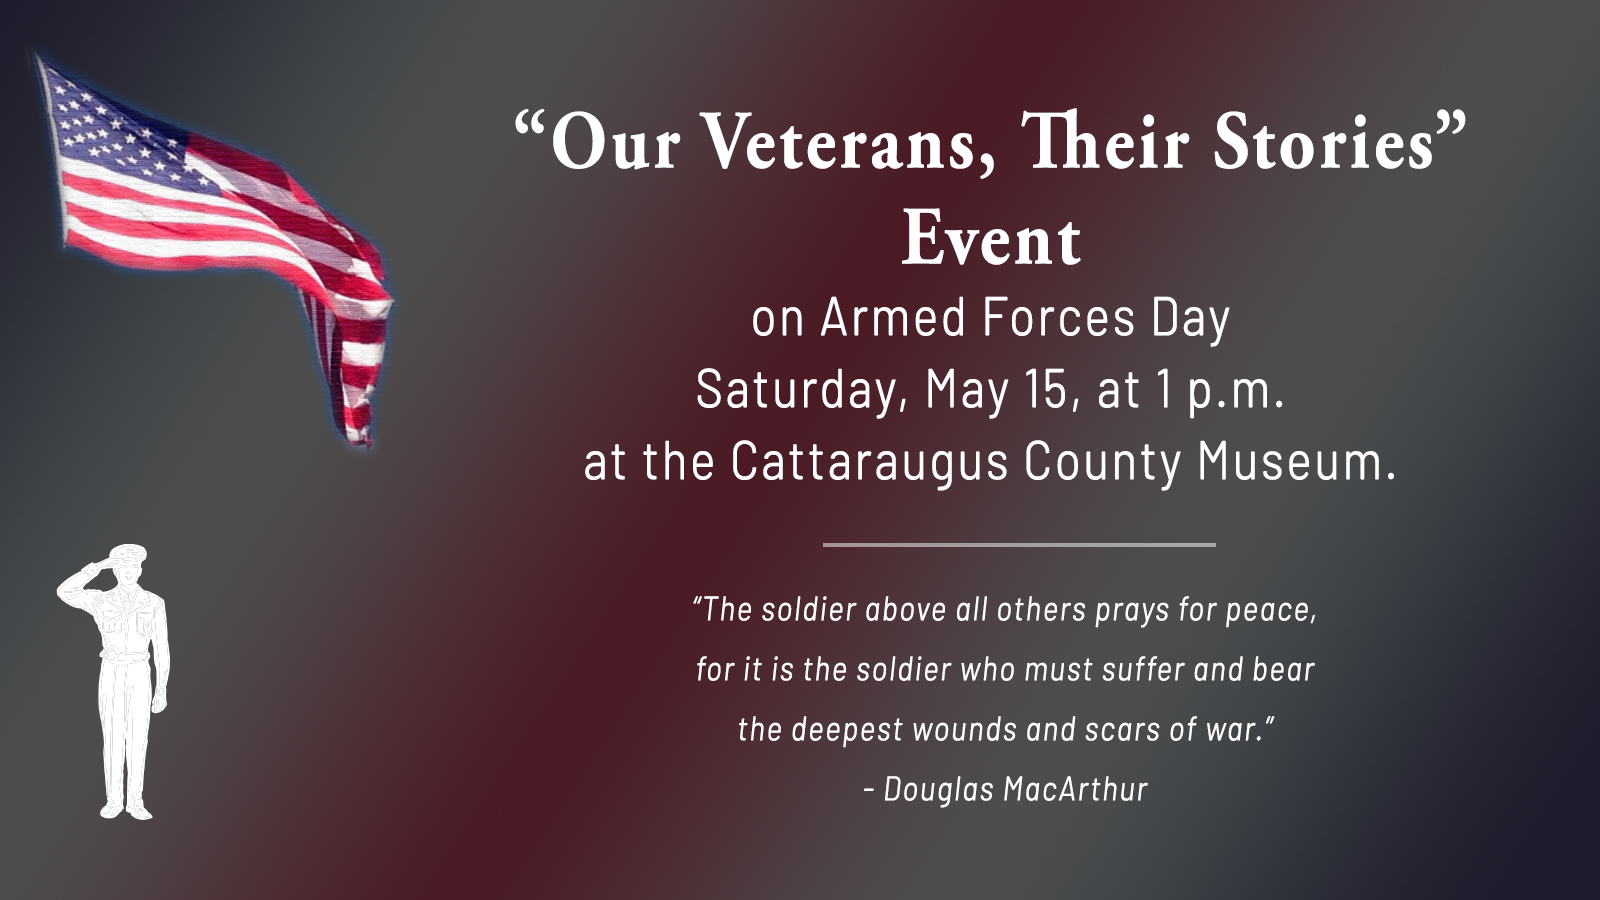 Our Veterans, Their Stories event on Armed Forces Day Saturday, May 15 at 1 pm at the Cattaraugus County Museum.